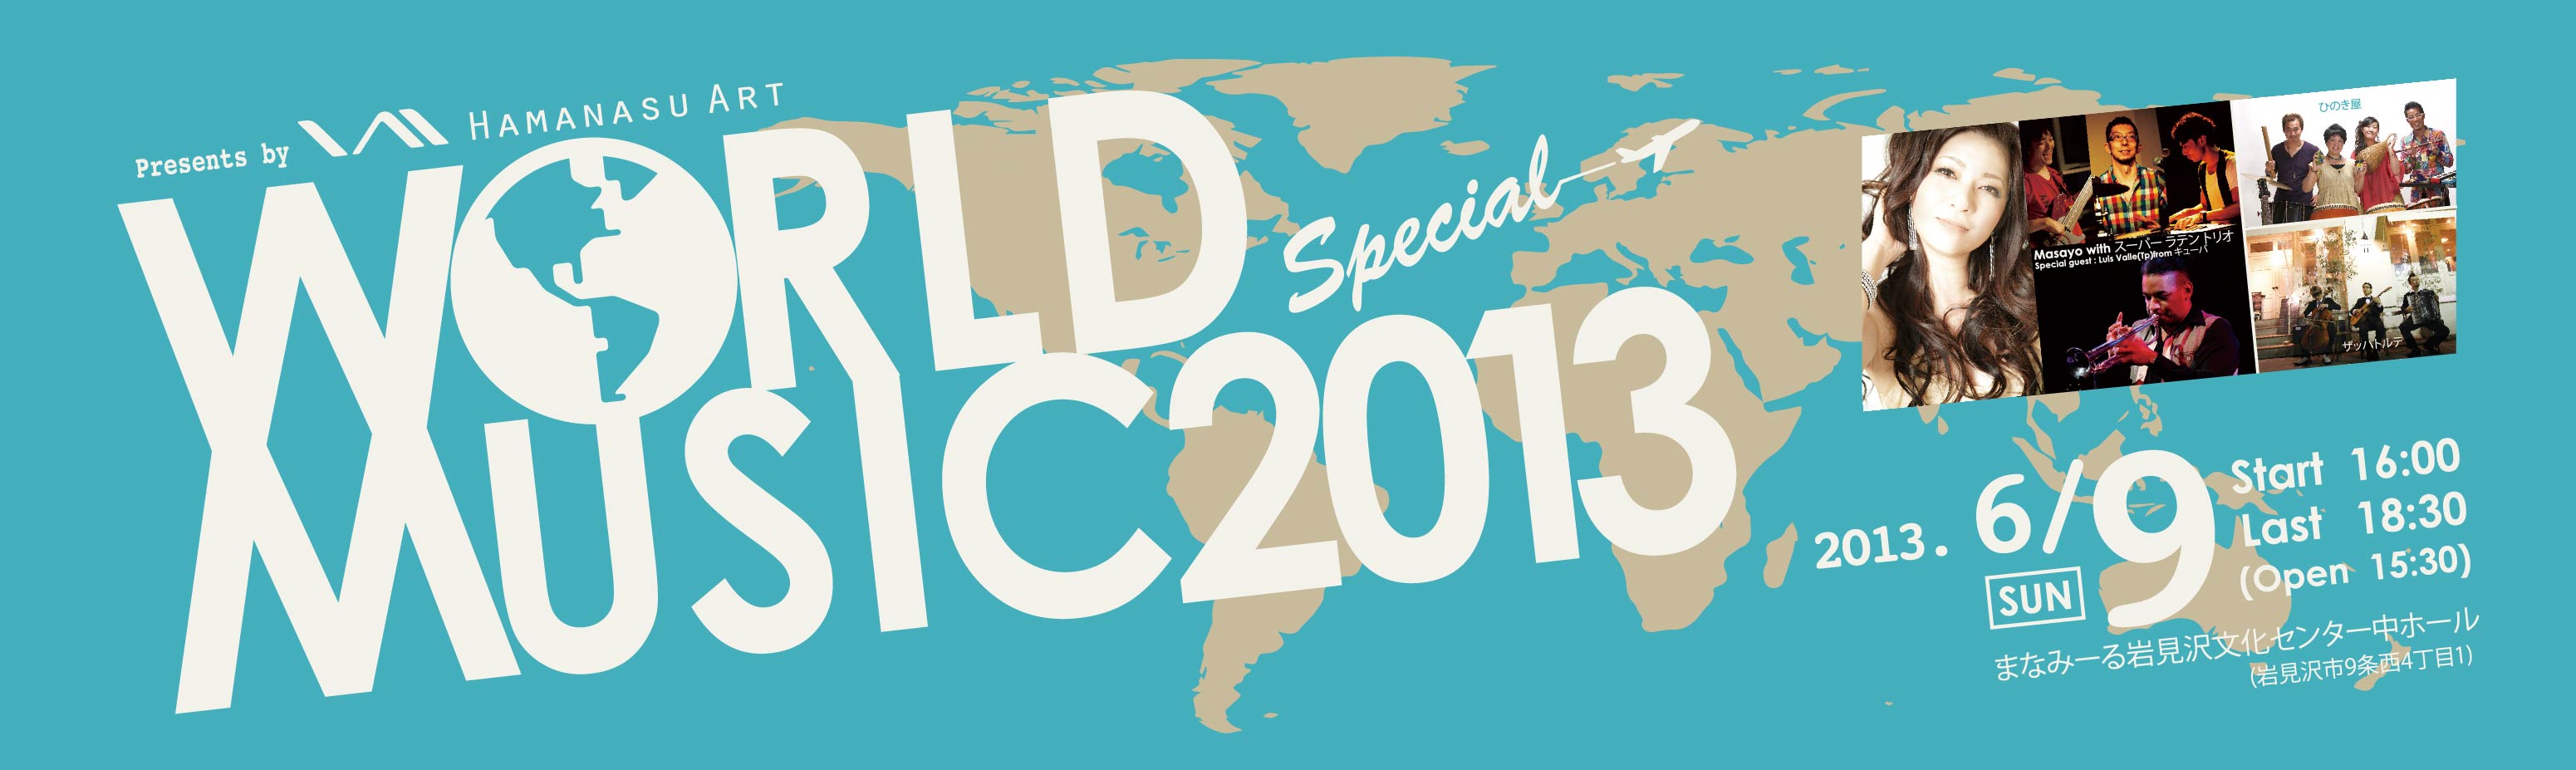 WORLD MUSIC 2013 SPECIAL